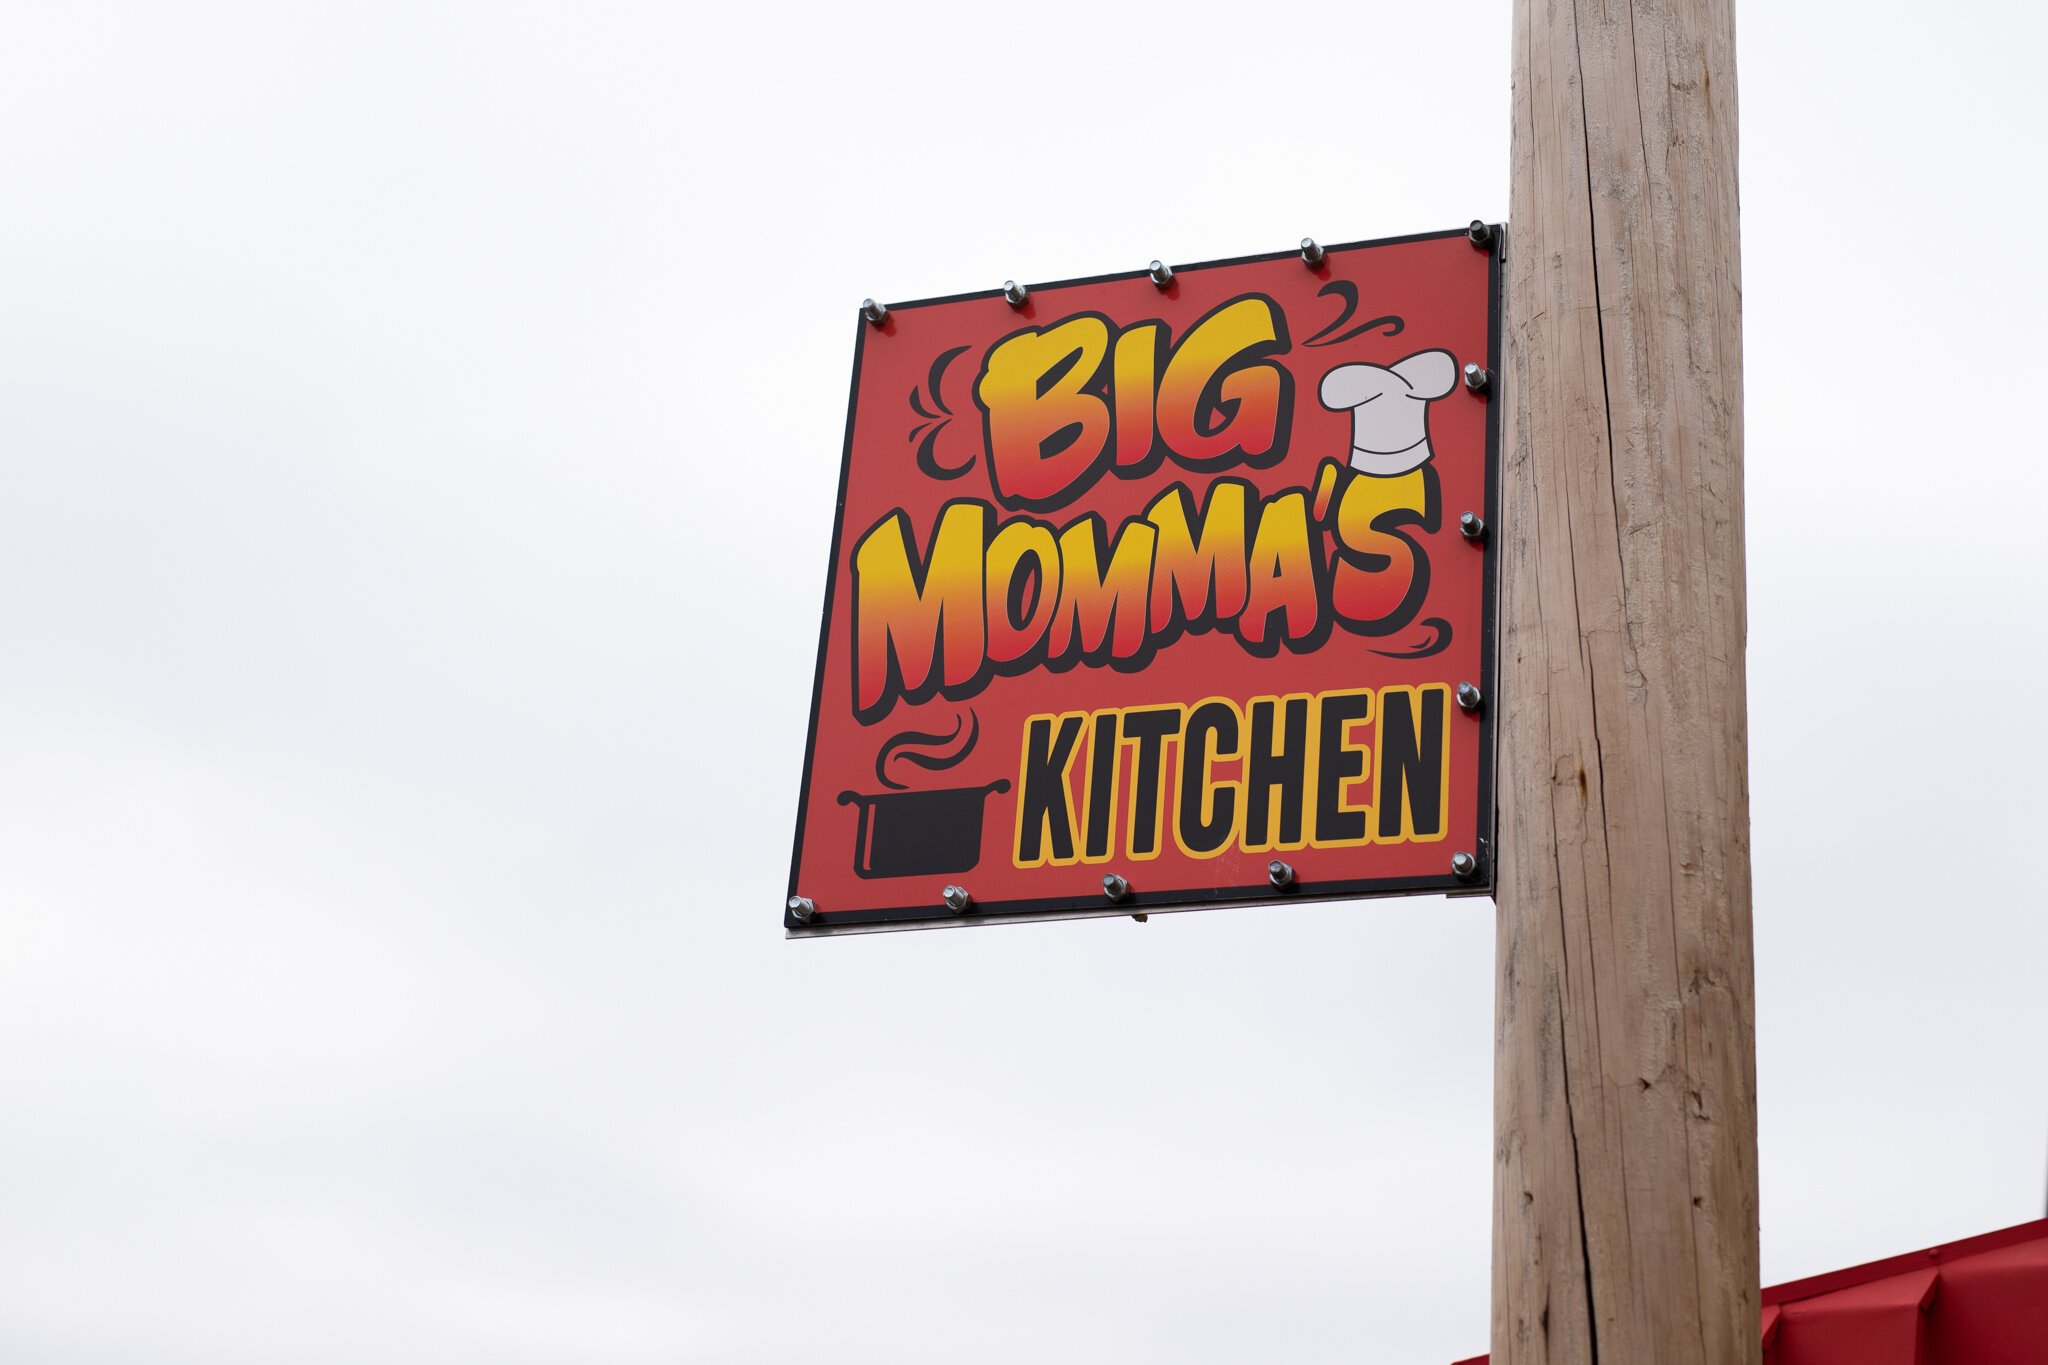 Big Momma's Kitchen is located at 1307 Oxford St.